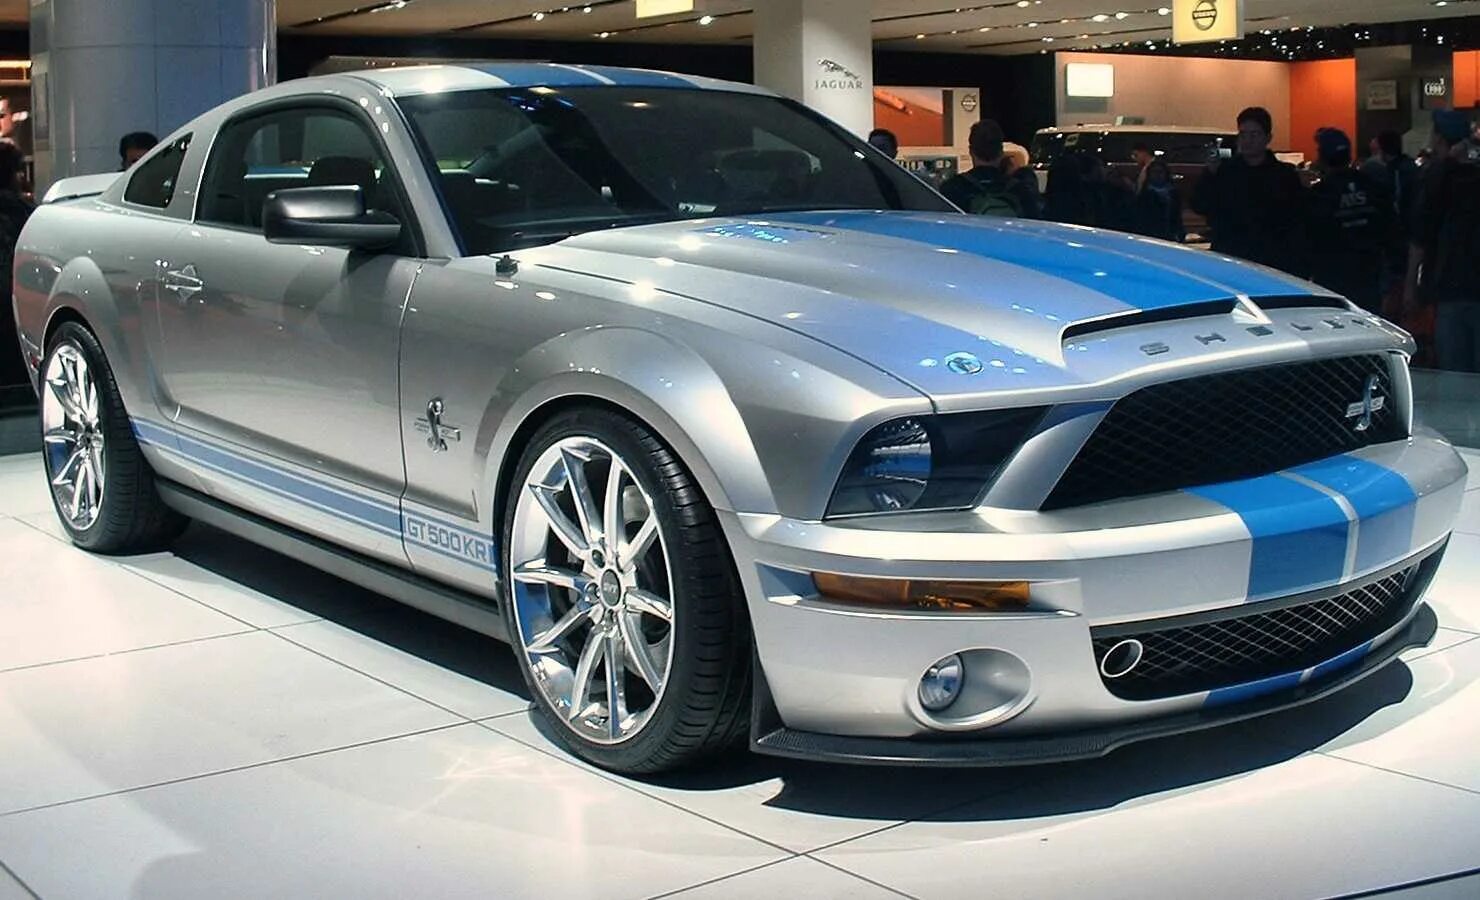 Mustang shelby gt. Ford Shelby gt500. Форт Мустанг Шэлби gt 500. Мустанг Шелби gt500. Форд Мустанг ГТ 500 Шелби.